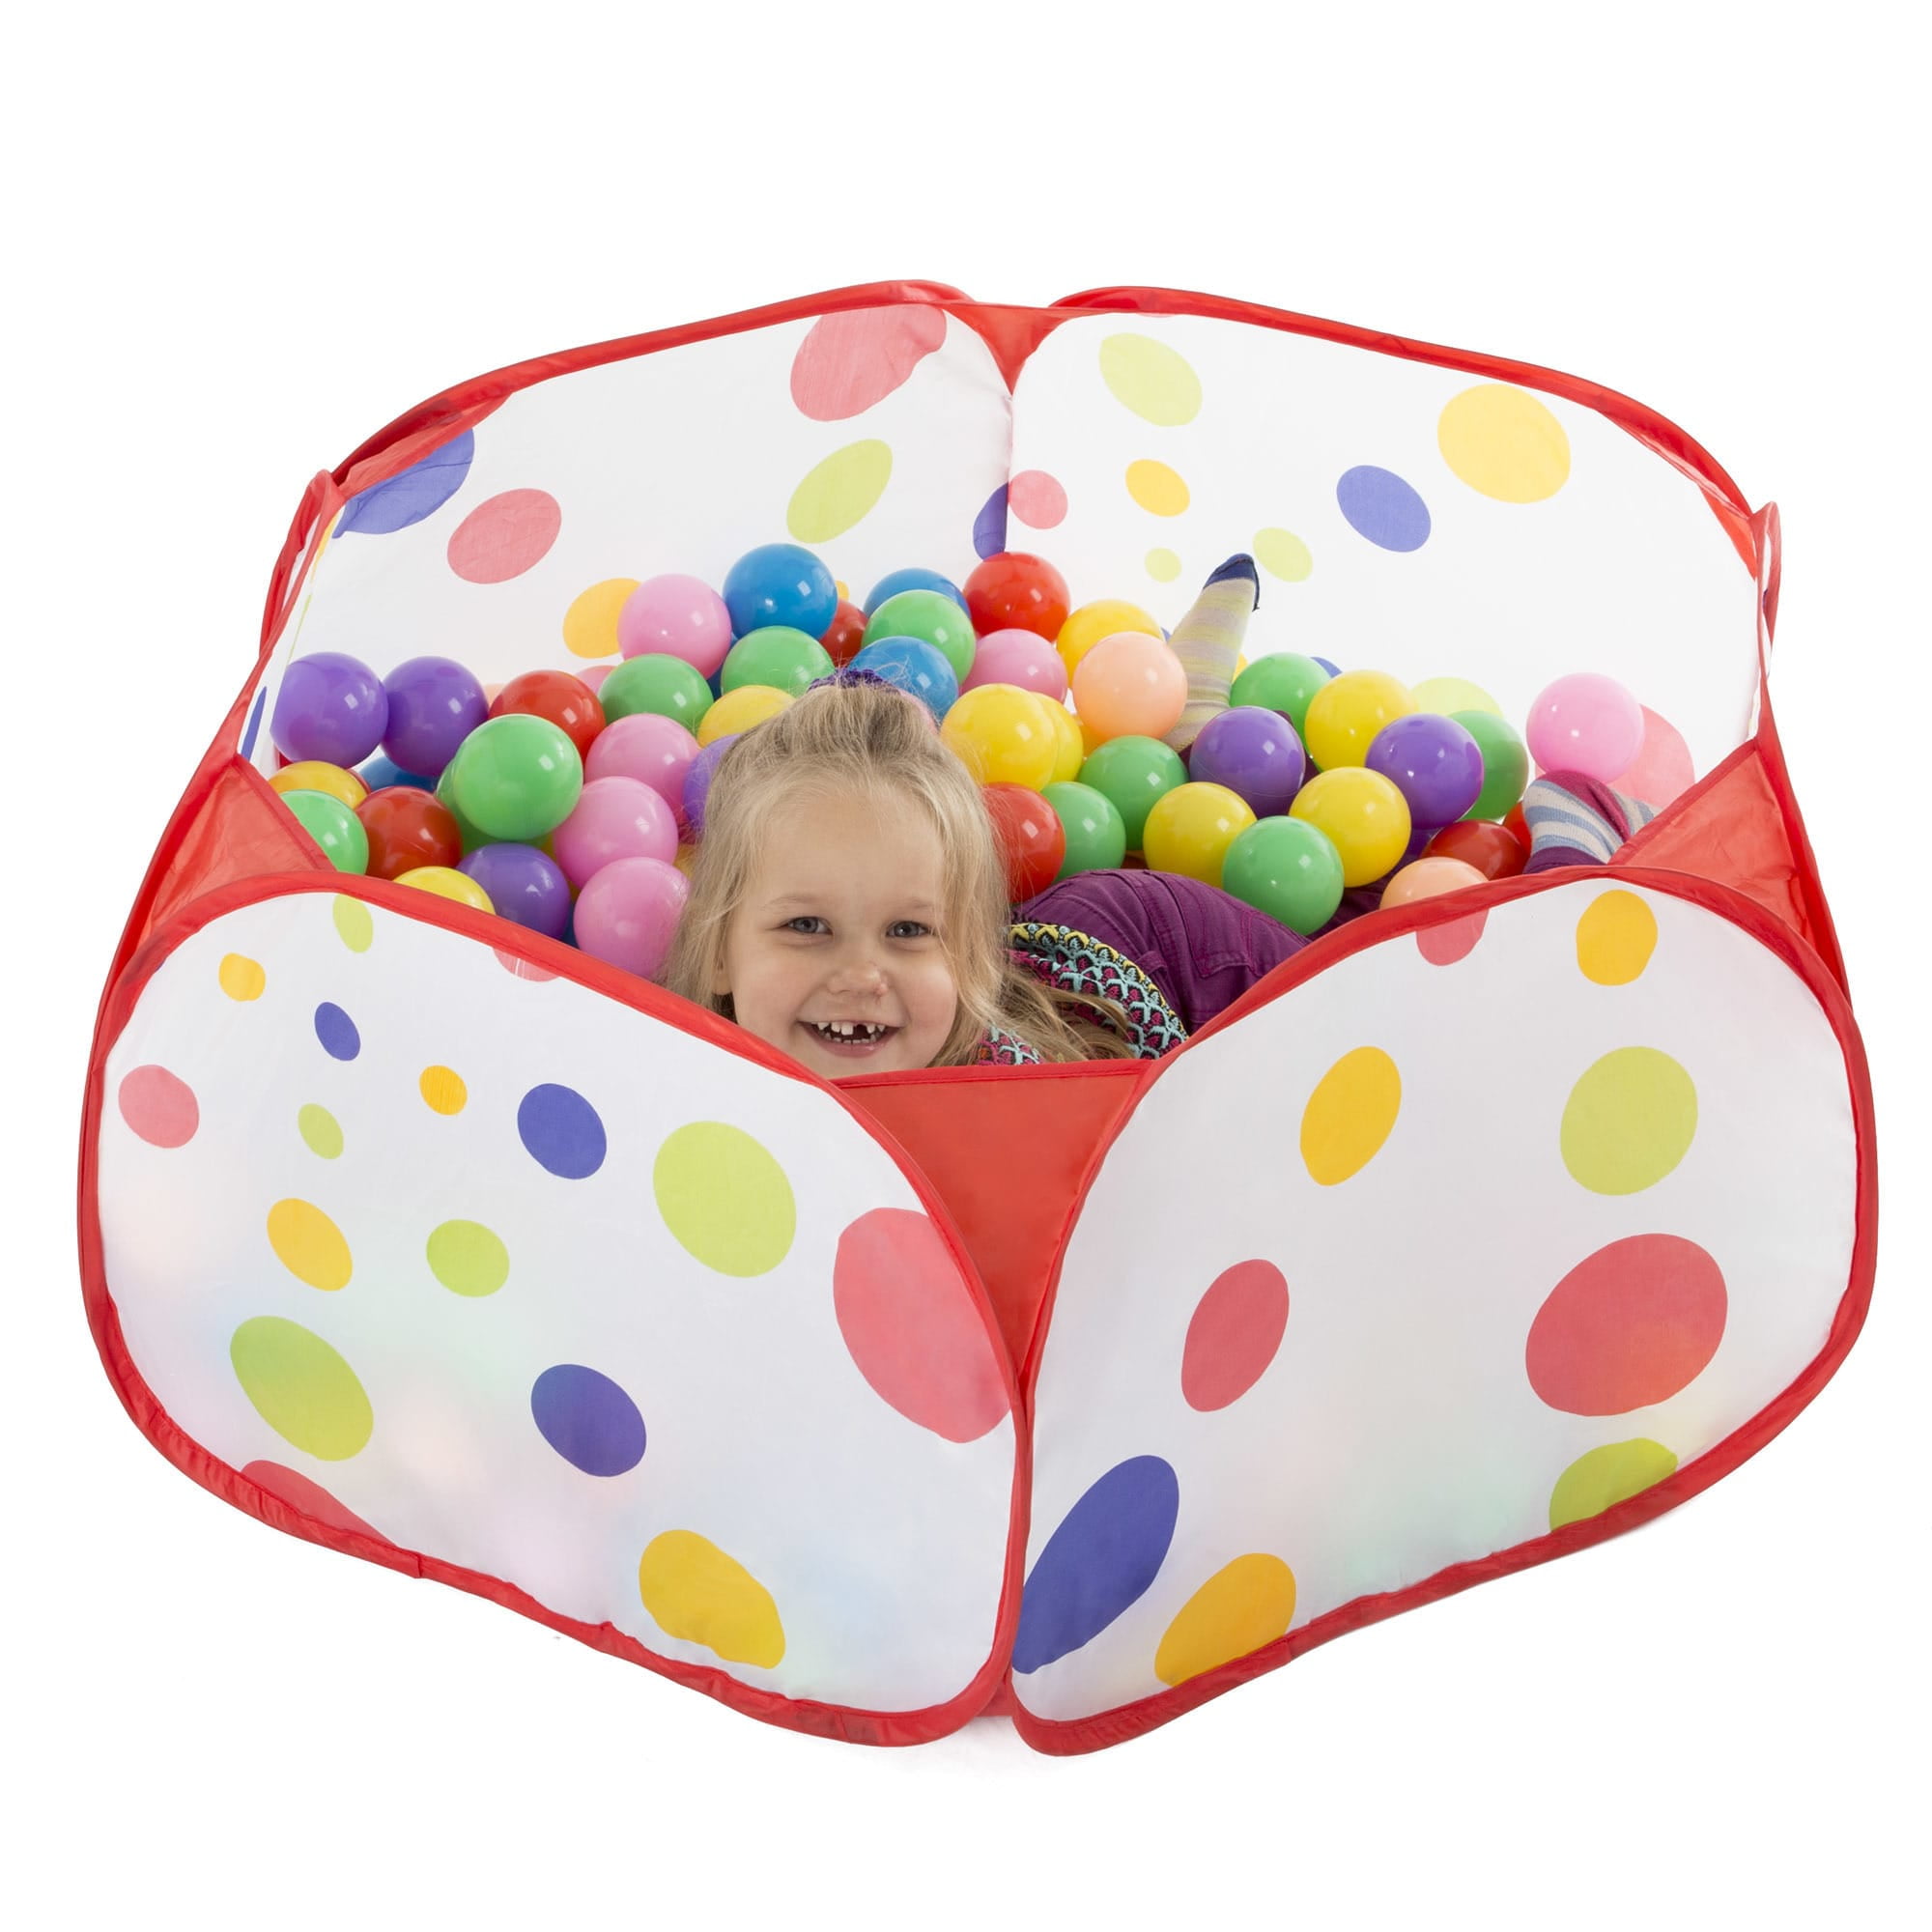 Kids Pop-up Six-sided Ball Pit Tent with 200 Balls by Hey! Play!